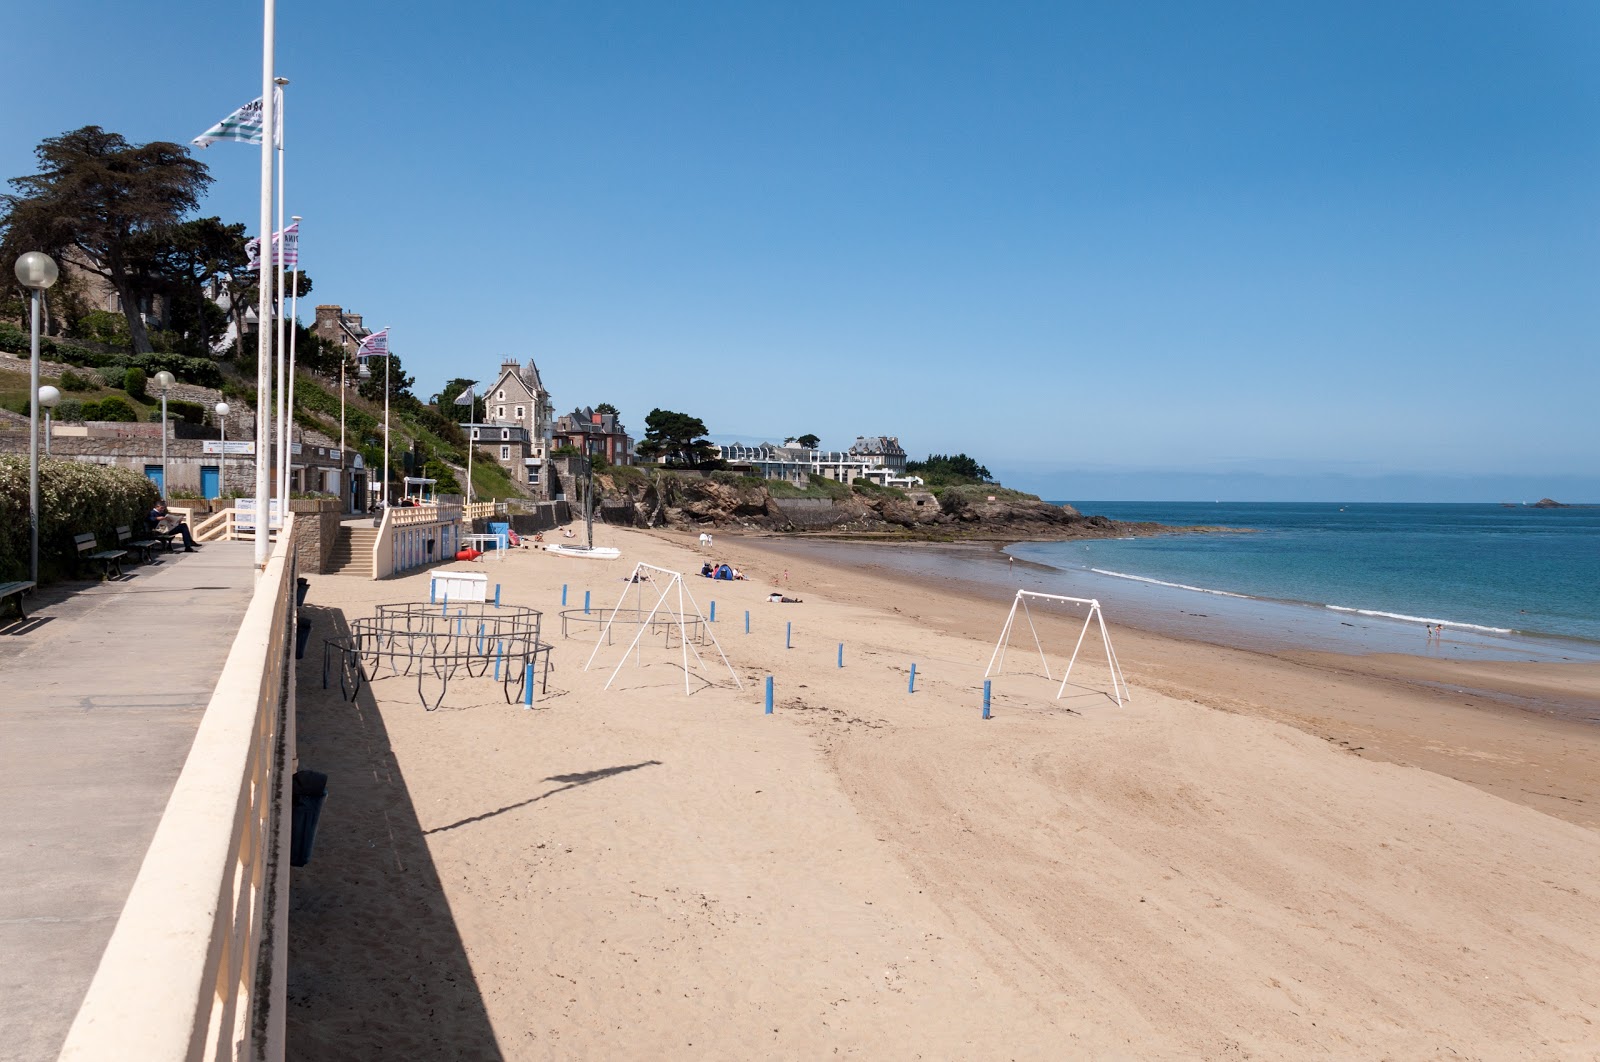 Photo of Plage Saint-Enogat with bright sand surface